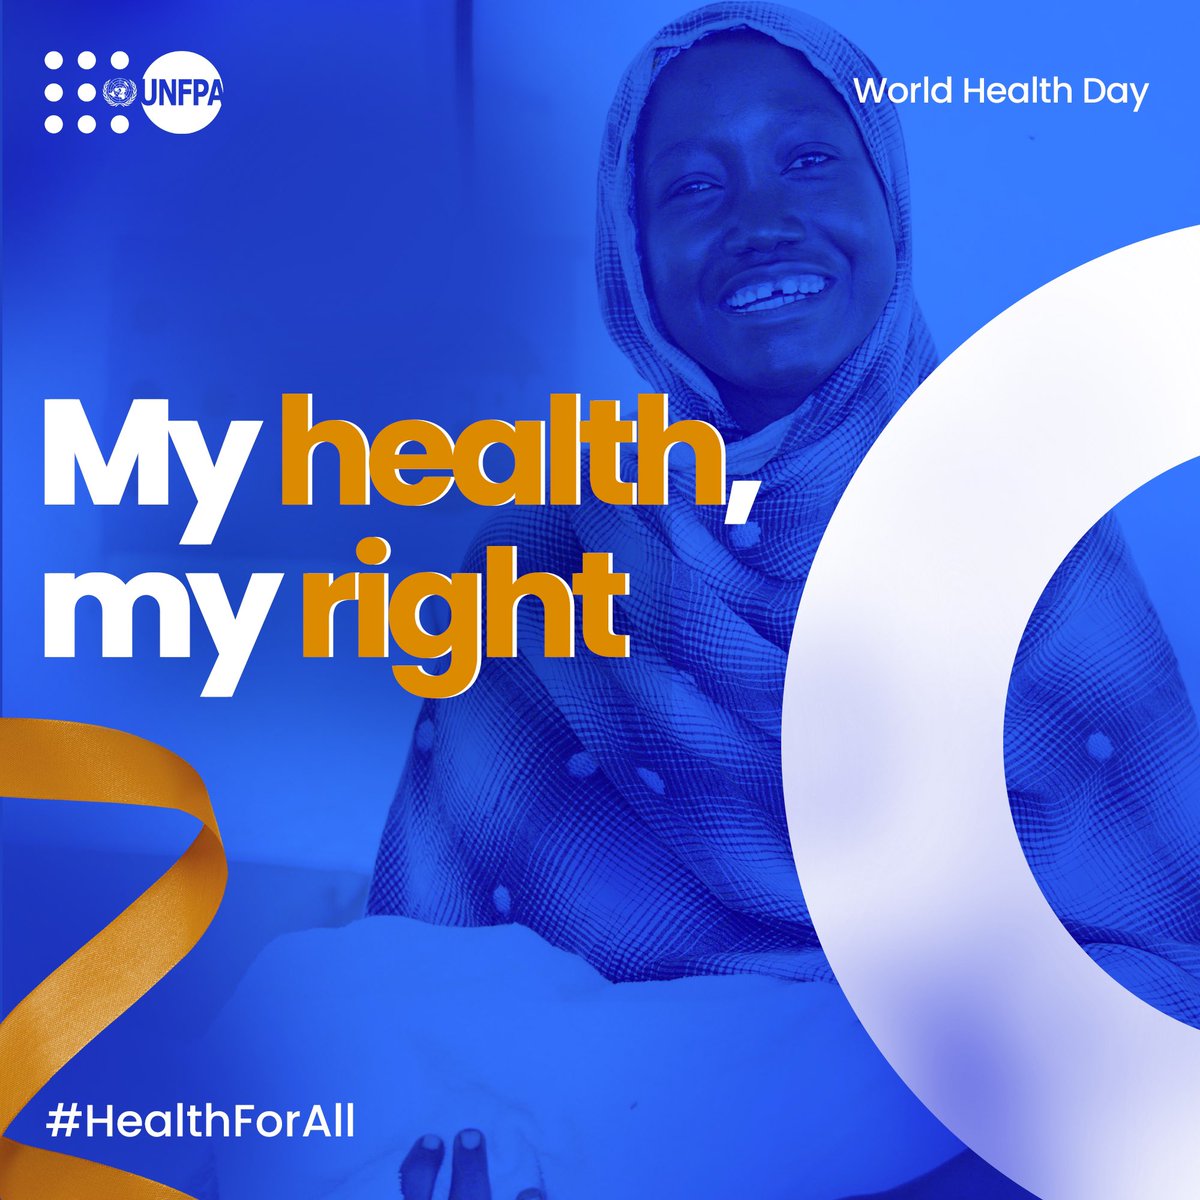 Ensuring #HealthForAll means empowering individuals with the knowledge and resources to make informed choices about their bodies & futures. This #WorldHealthDay, @UNFPA recommits to promoting access to quality #SRH Services.